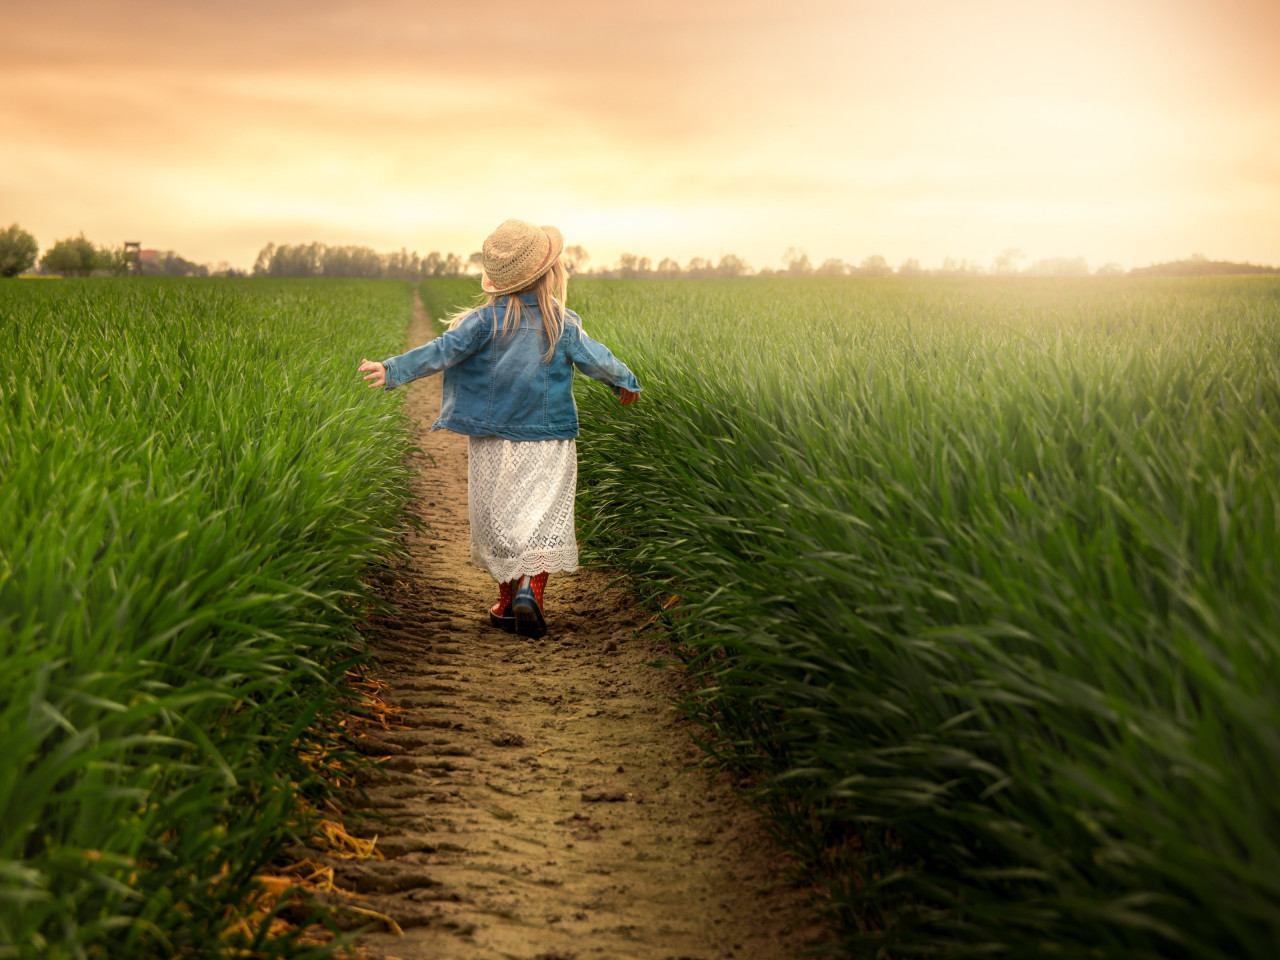 Child in the green field at sunset wallpaper 1280x960